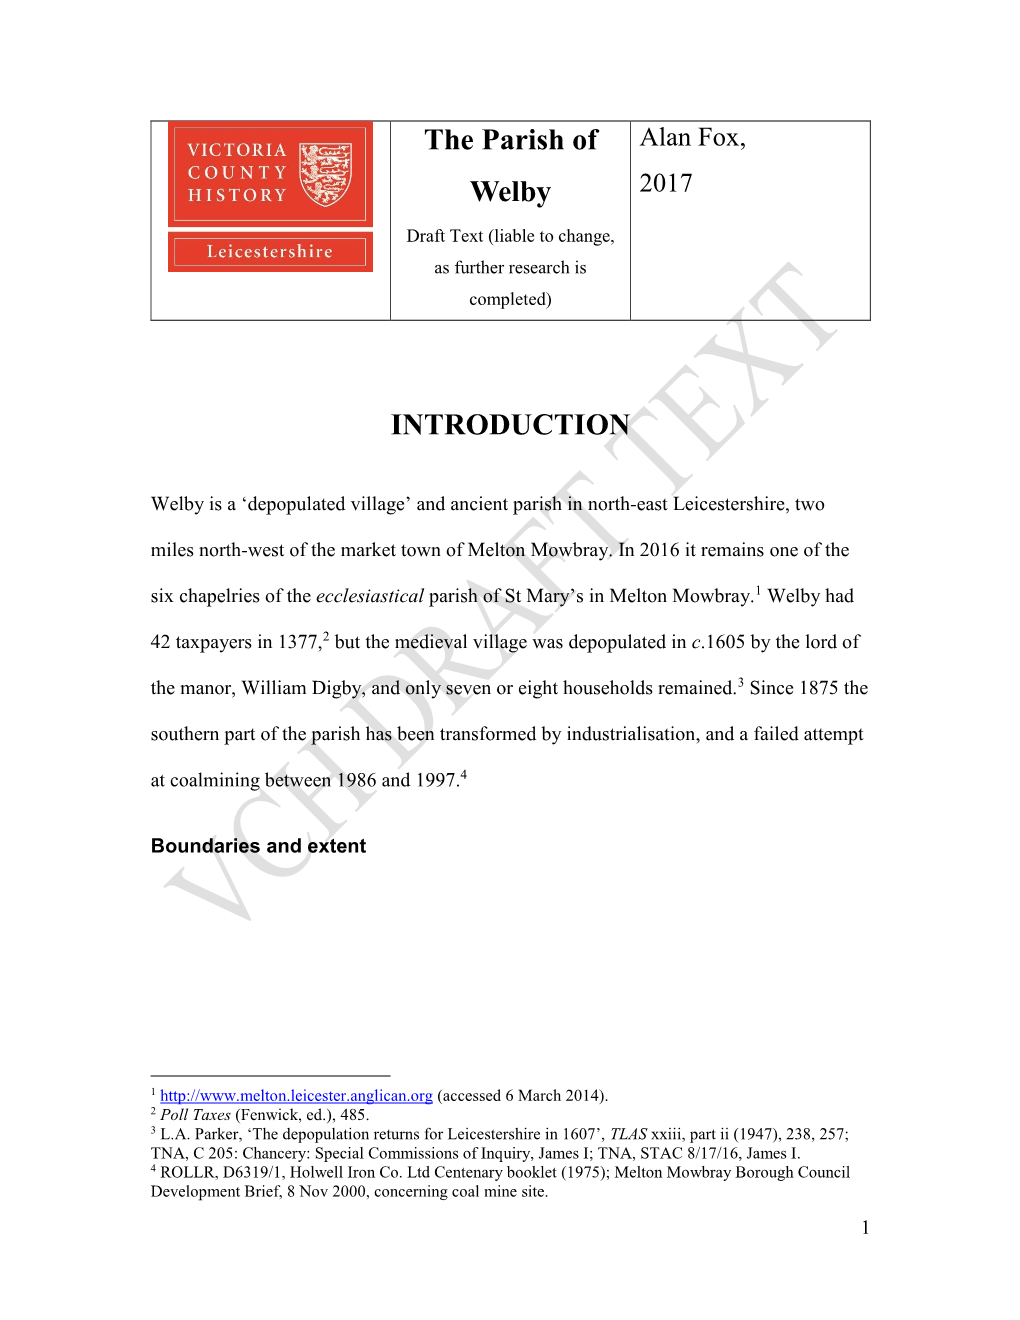 The Parish of Welby INTRODUCTION